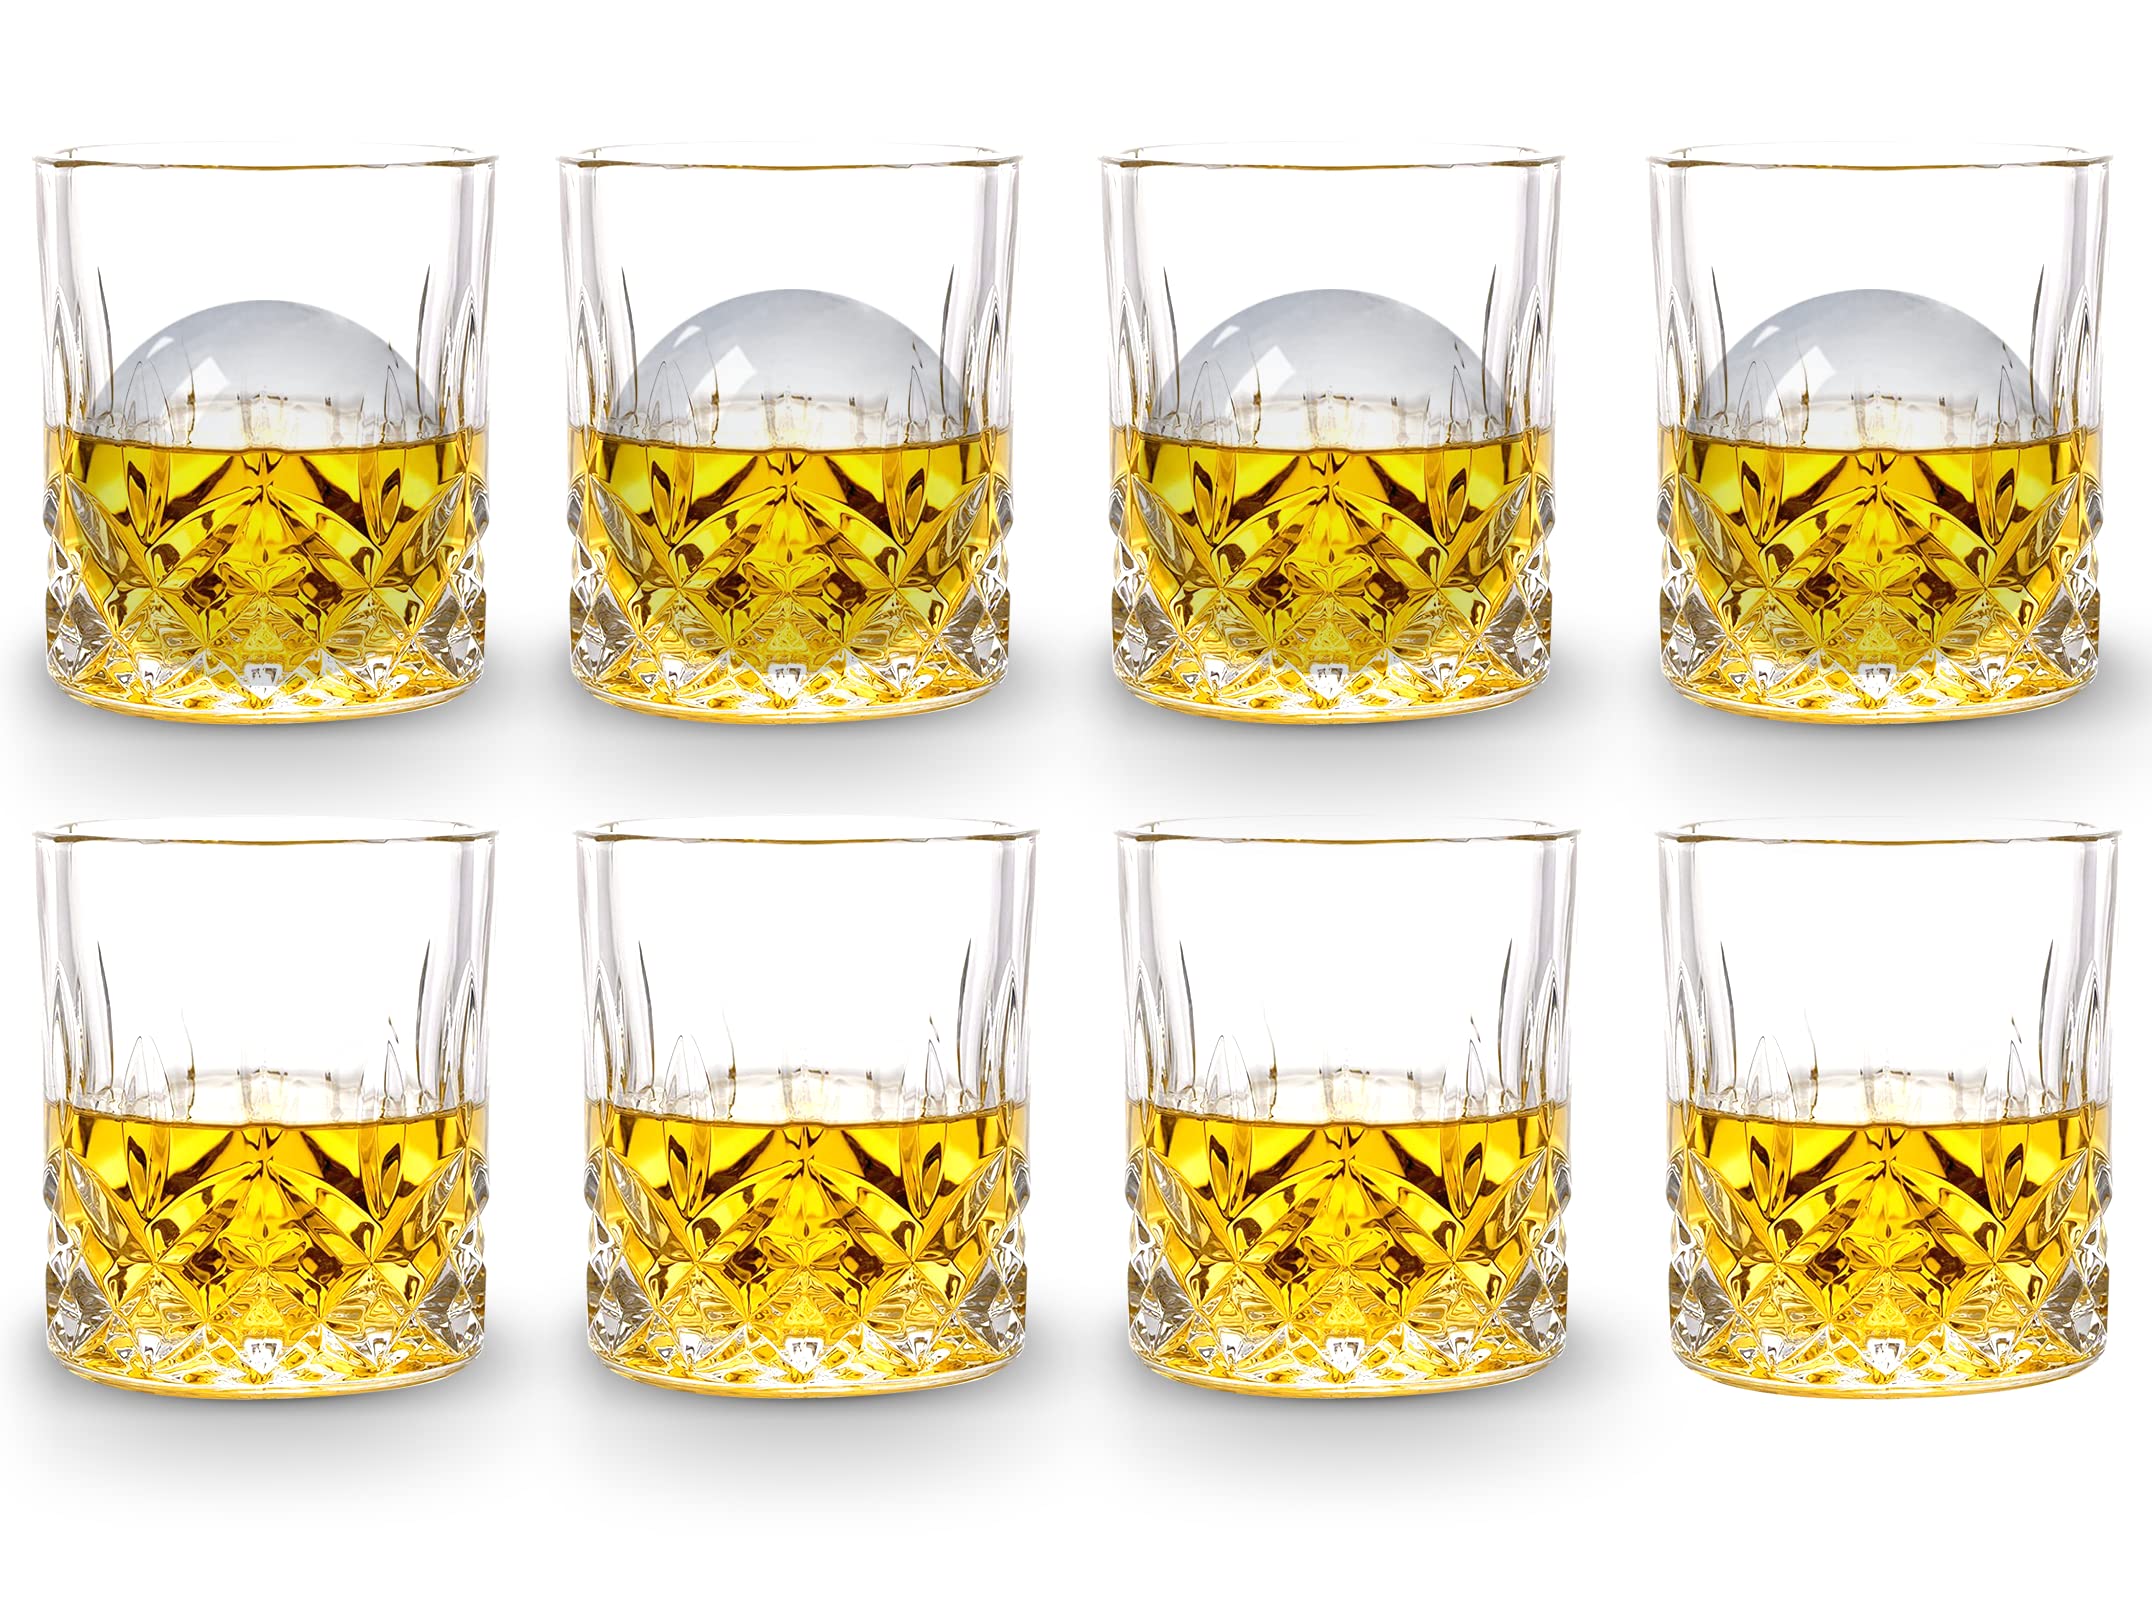 Gencywe Crystal Whiskey Glasses Set of 8(Buy 6, get 2 Free), 11 OZ Old Fashioned Whiskey Glasses, Bourbon Cocktail Rocks Glasses, Clear Bar Glasses for Drinking Scotch Vodka Tequila Rum Gift for Men